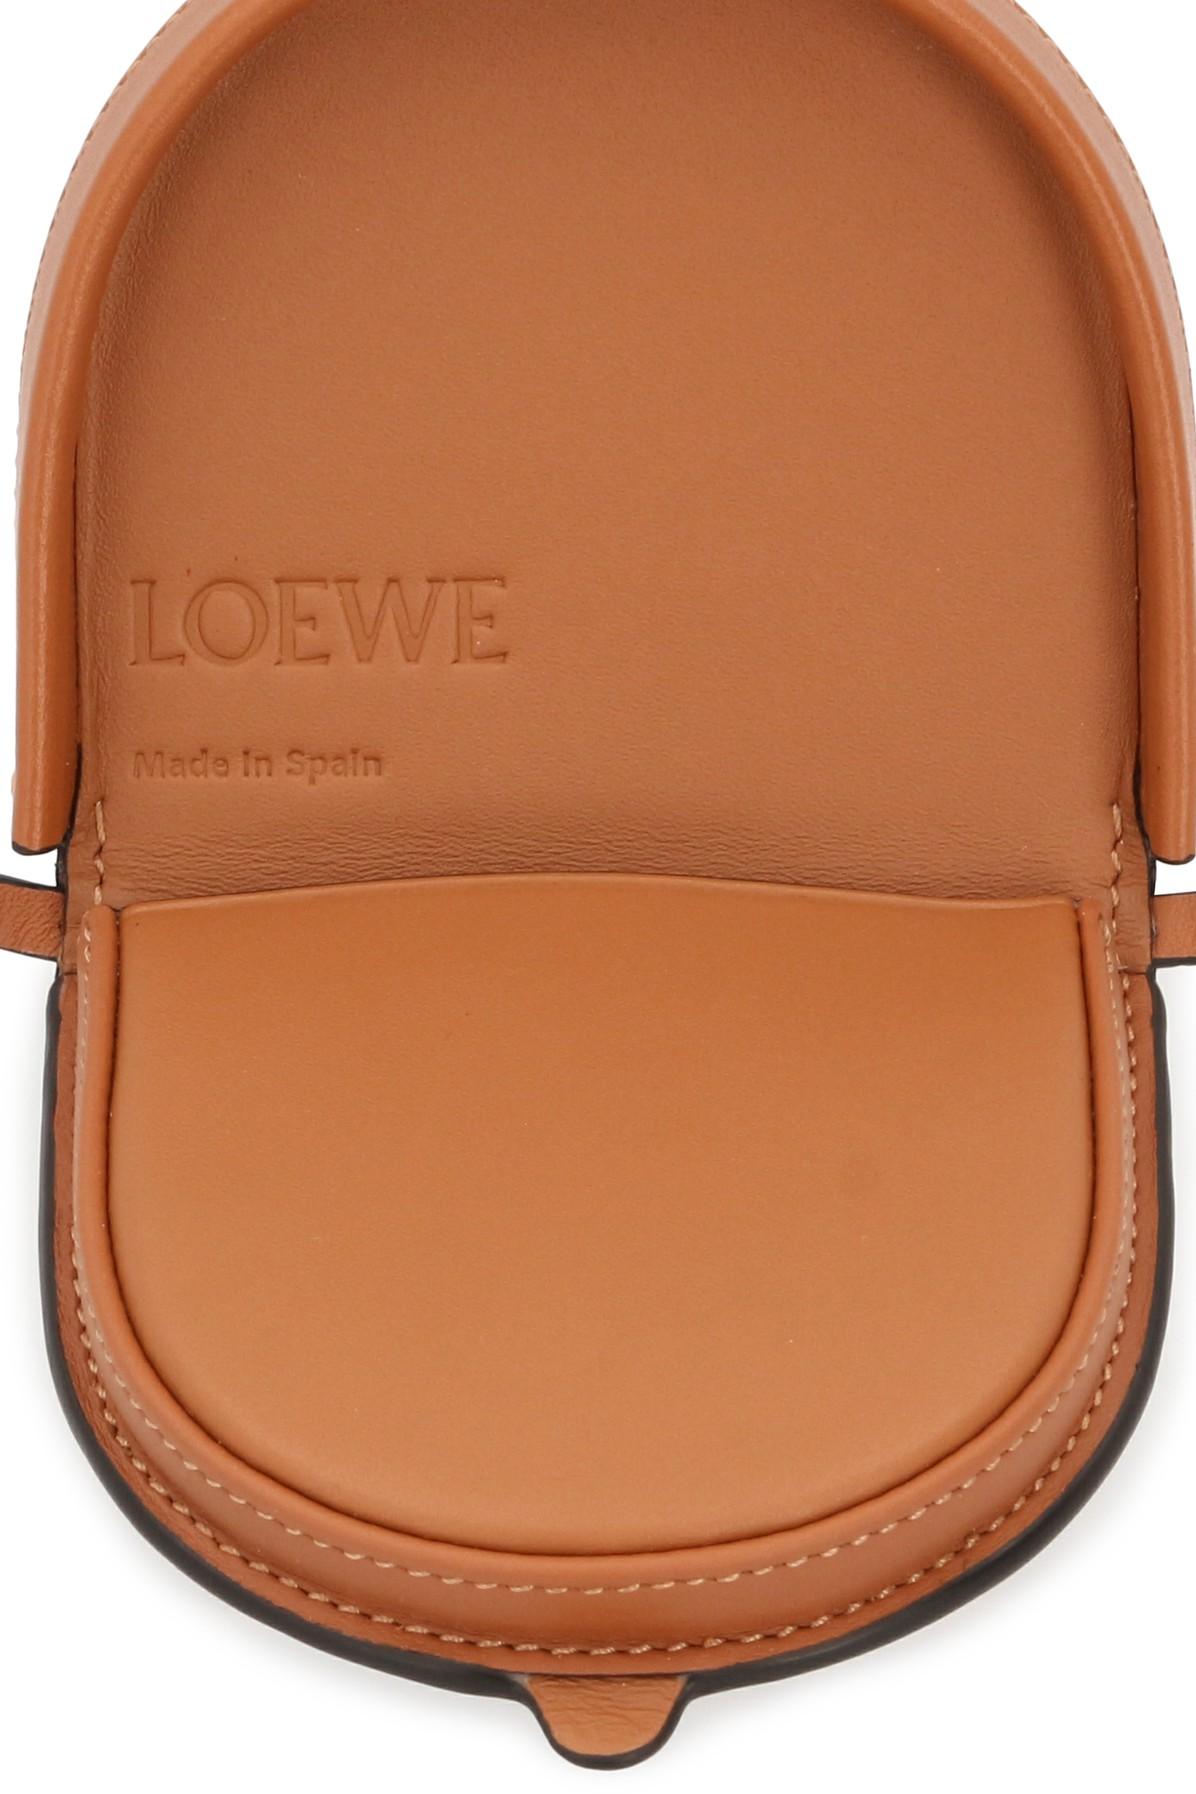 Loewe Small Heel Pouch in Natural | Lyst